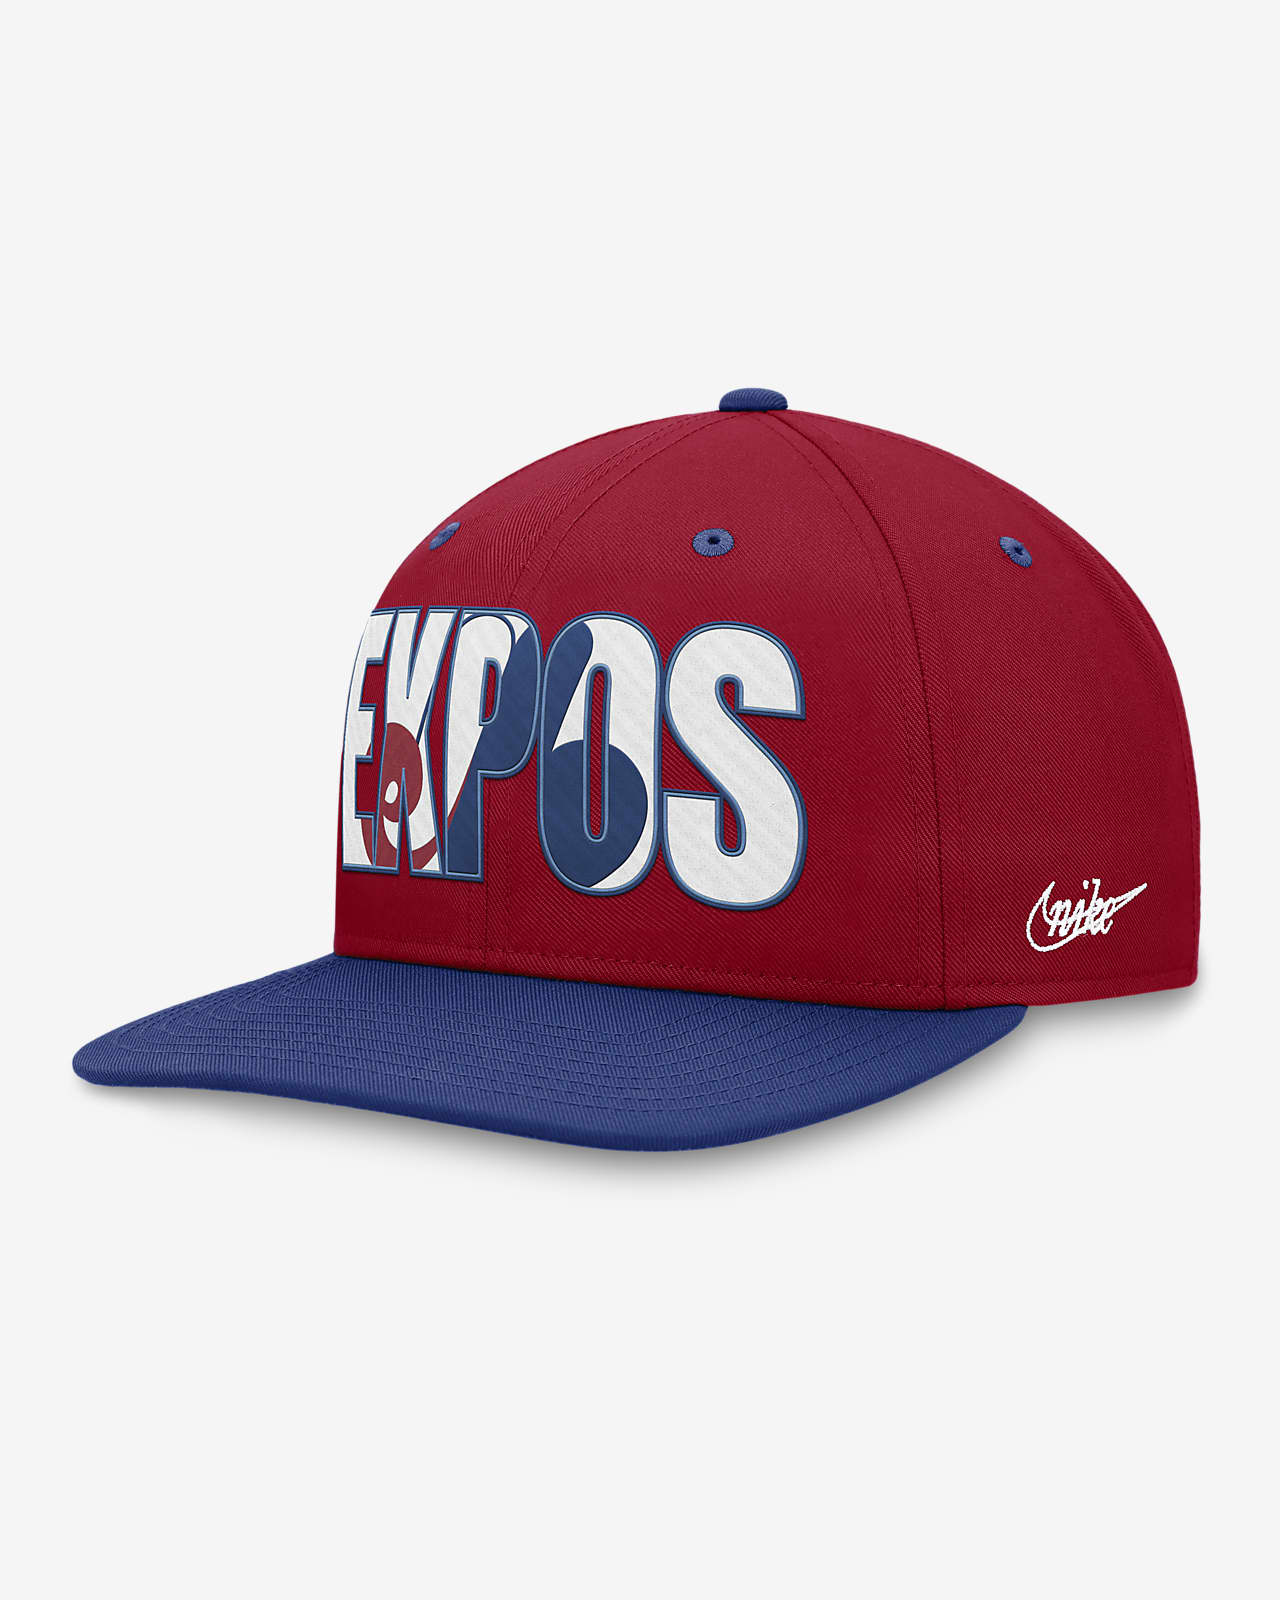 https://static.nike.com/a/images/t_PDP_1280_v1/f_auto,q_auto:eco/94472648-0db2-4dd4-92f3-89b6ed711aef/montreal-expos-pro-cooperstown-mens-adjustable-hat-hxq9sH.png